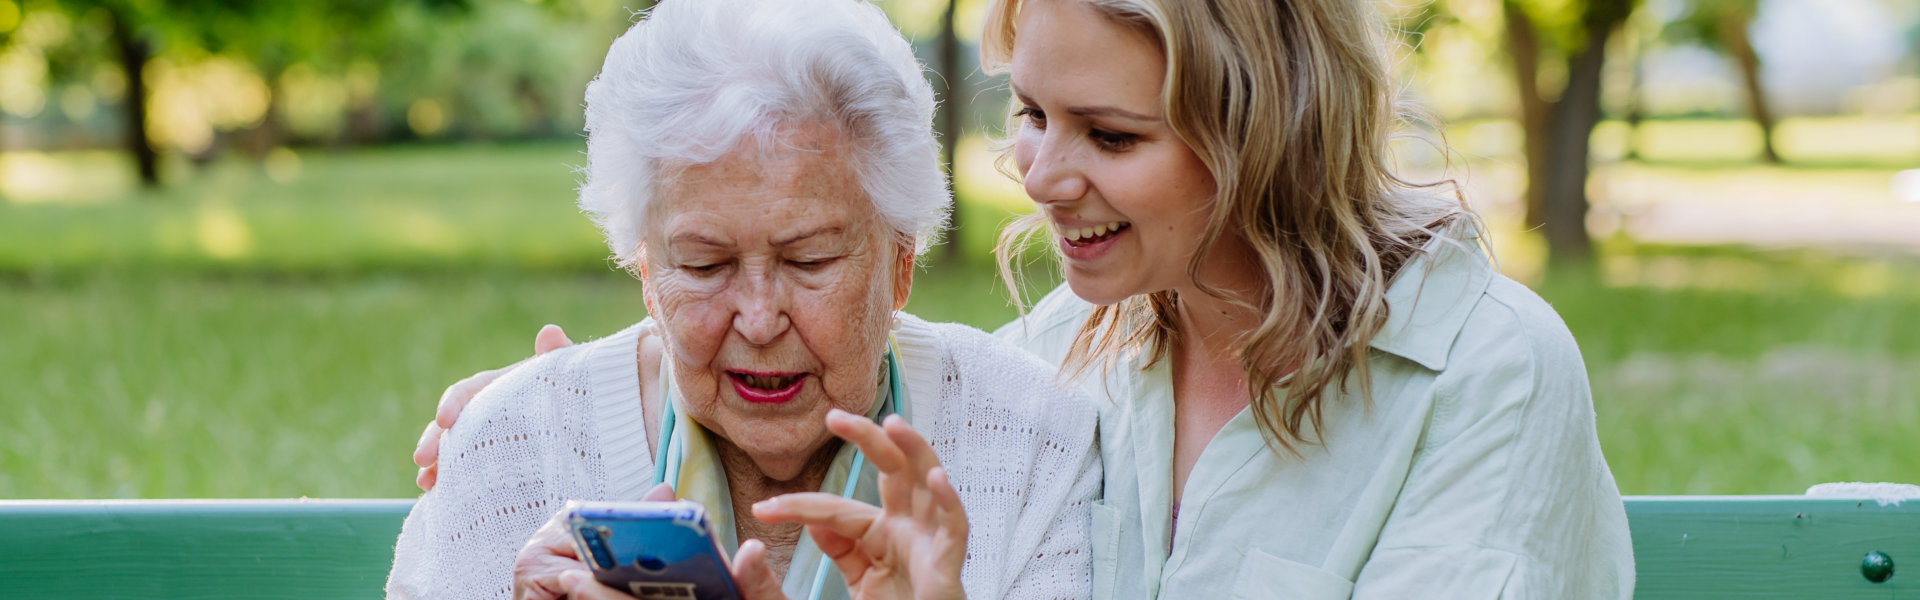 caregiver assist her patient in using phone